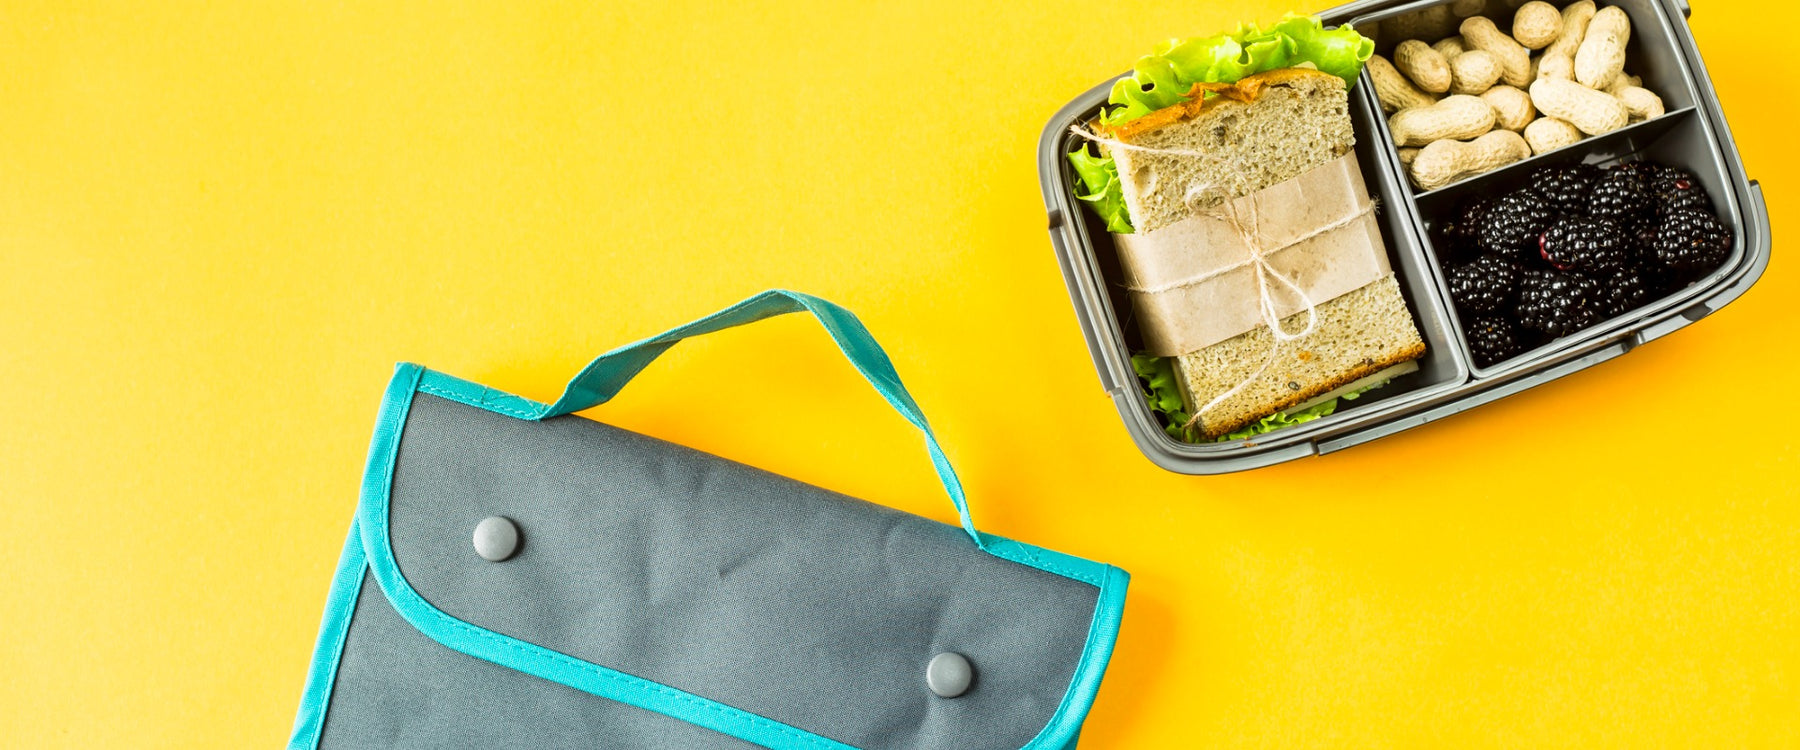 Keep Cool with Wholesale Coolers and Insulated Lunch Bags